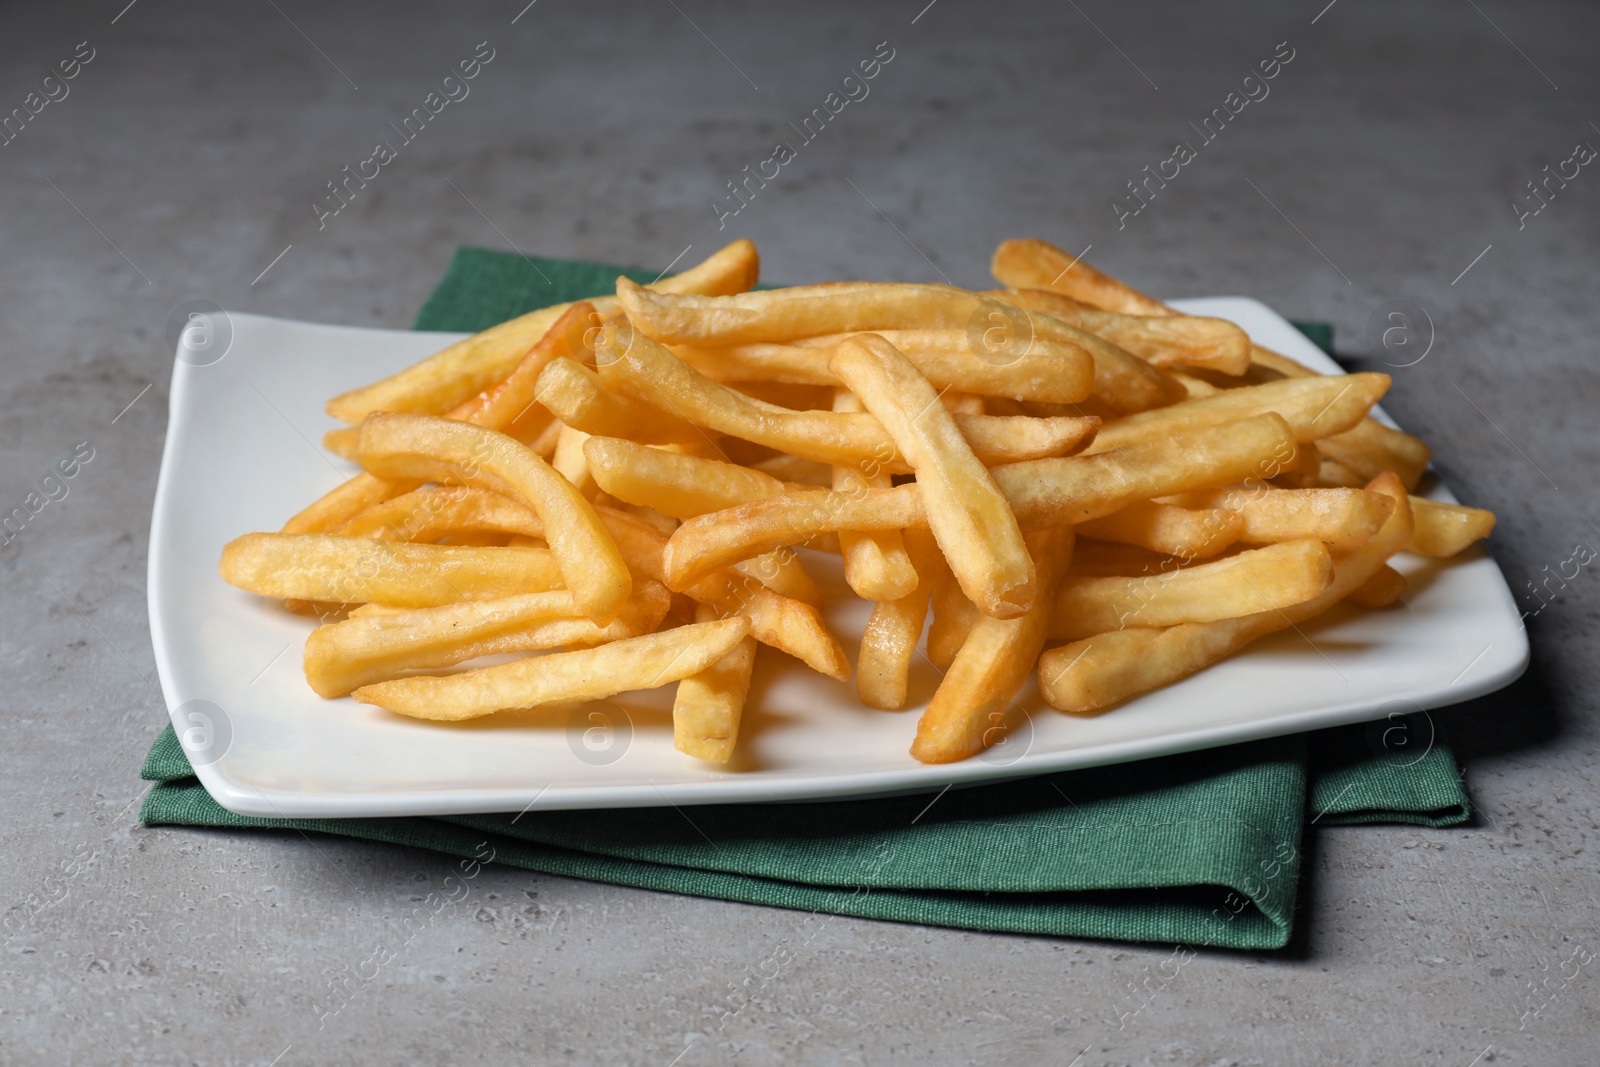 Photo of Plate of tasty french fries on grey table